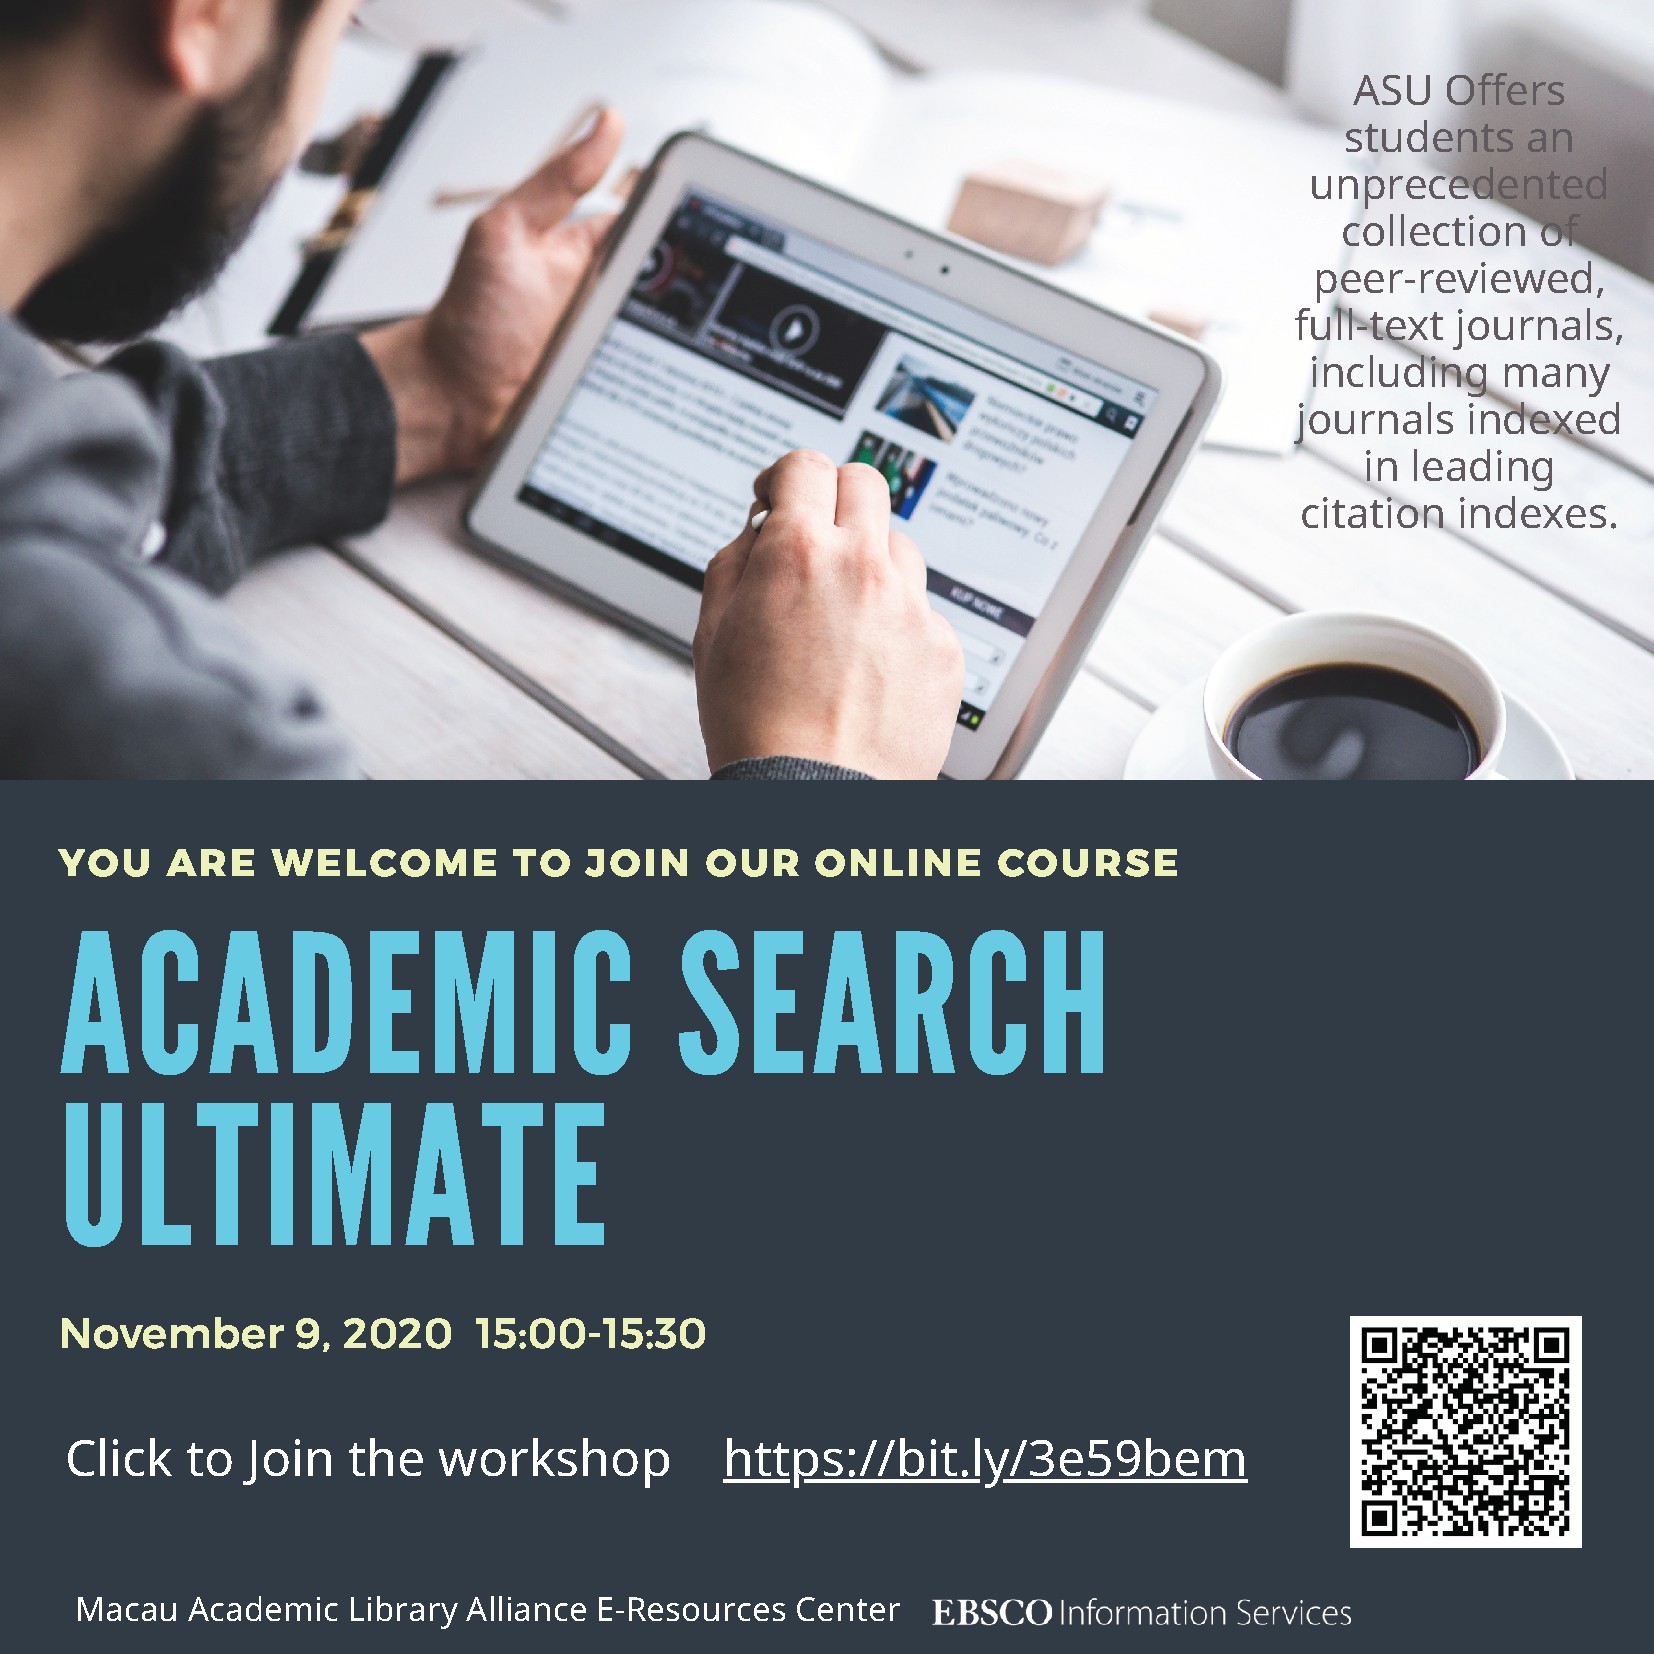 EBSCO Databases Online Training Sessions - Academic Search Ultimate (English Session)